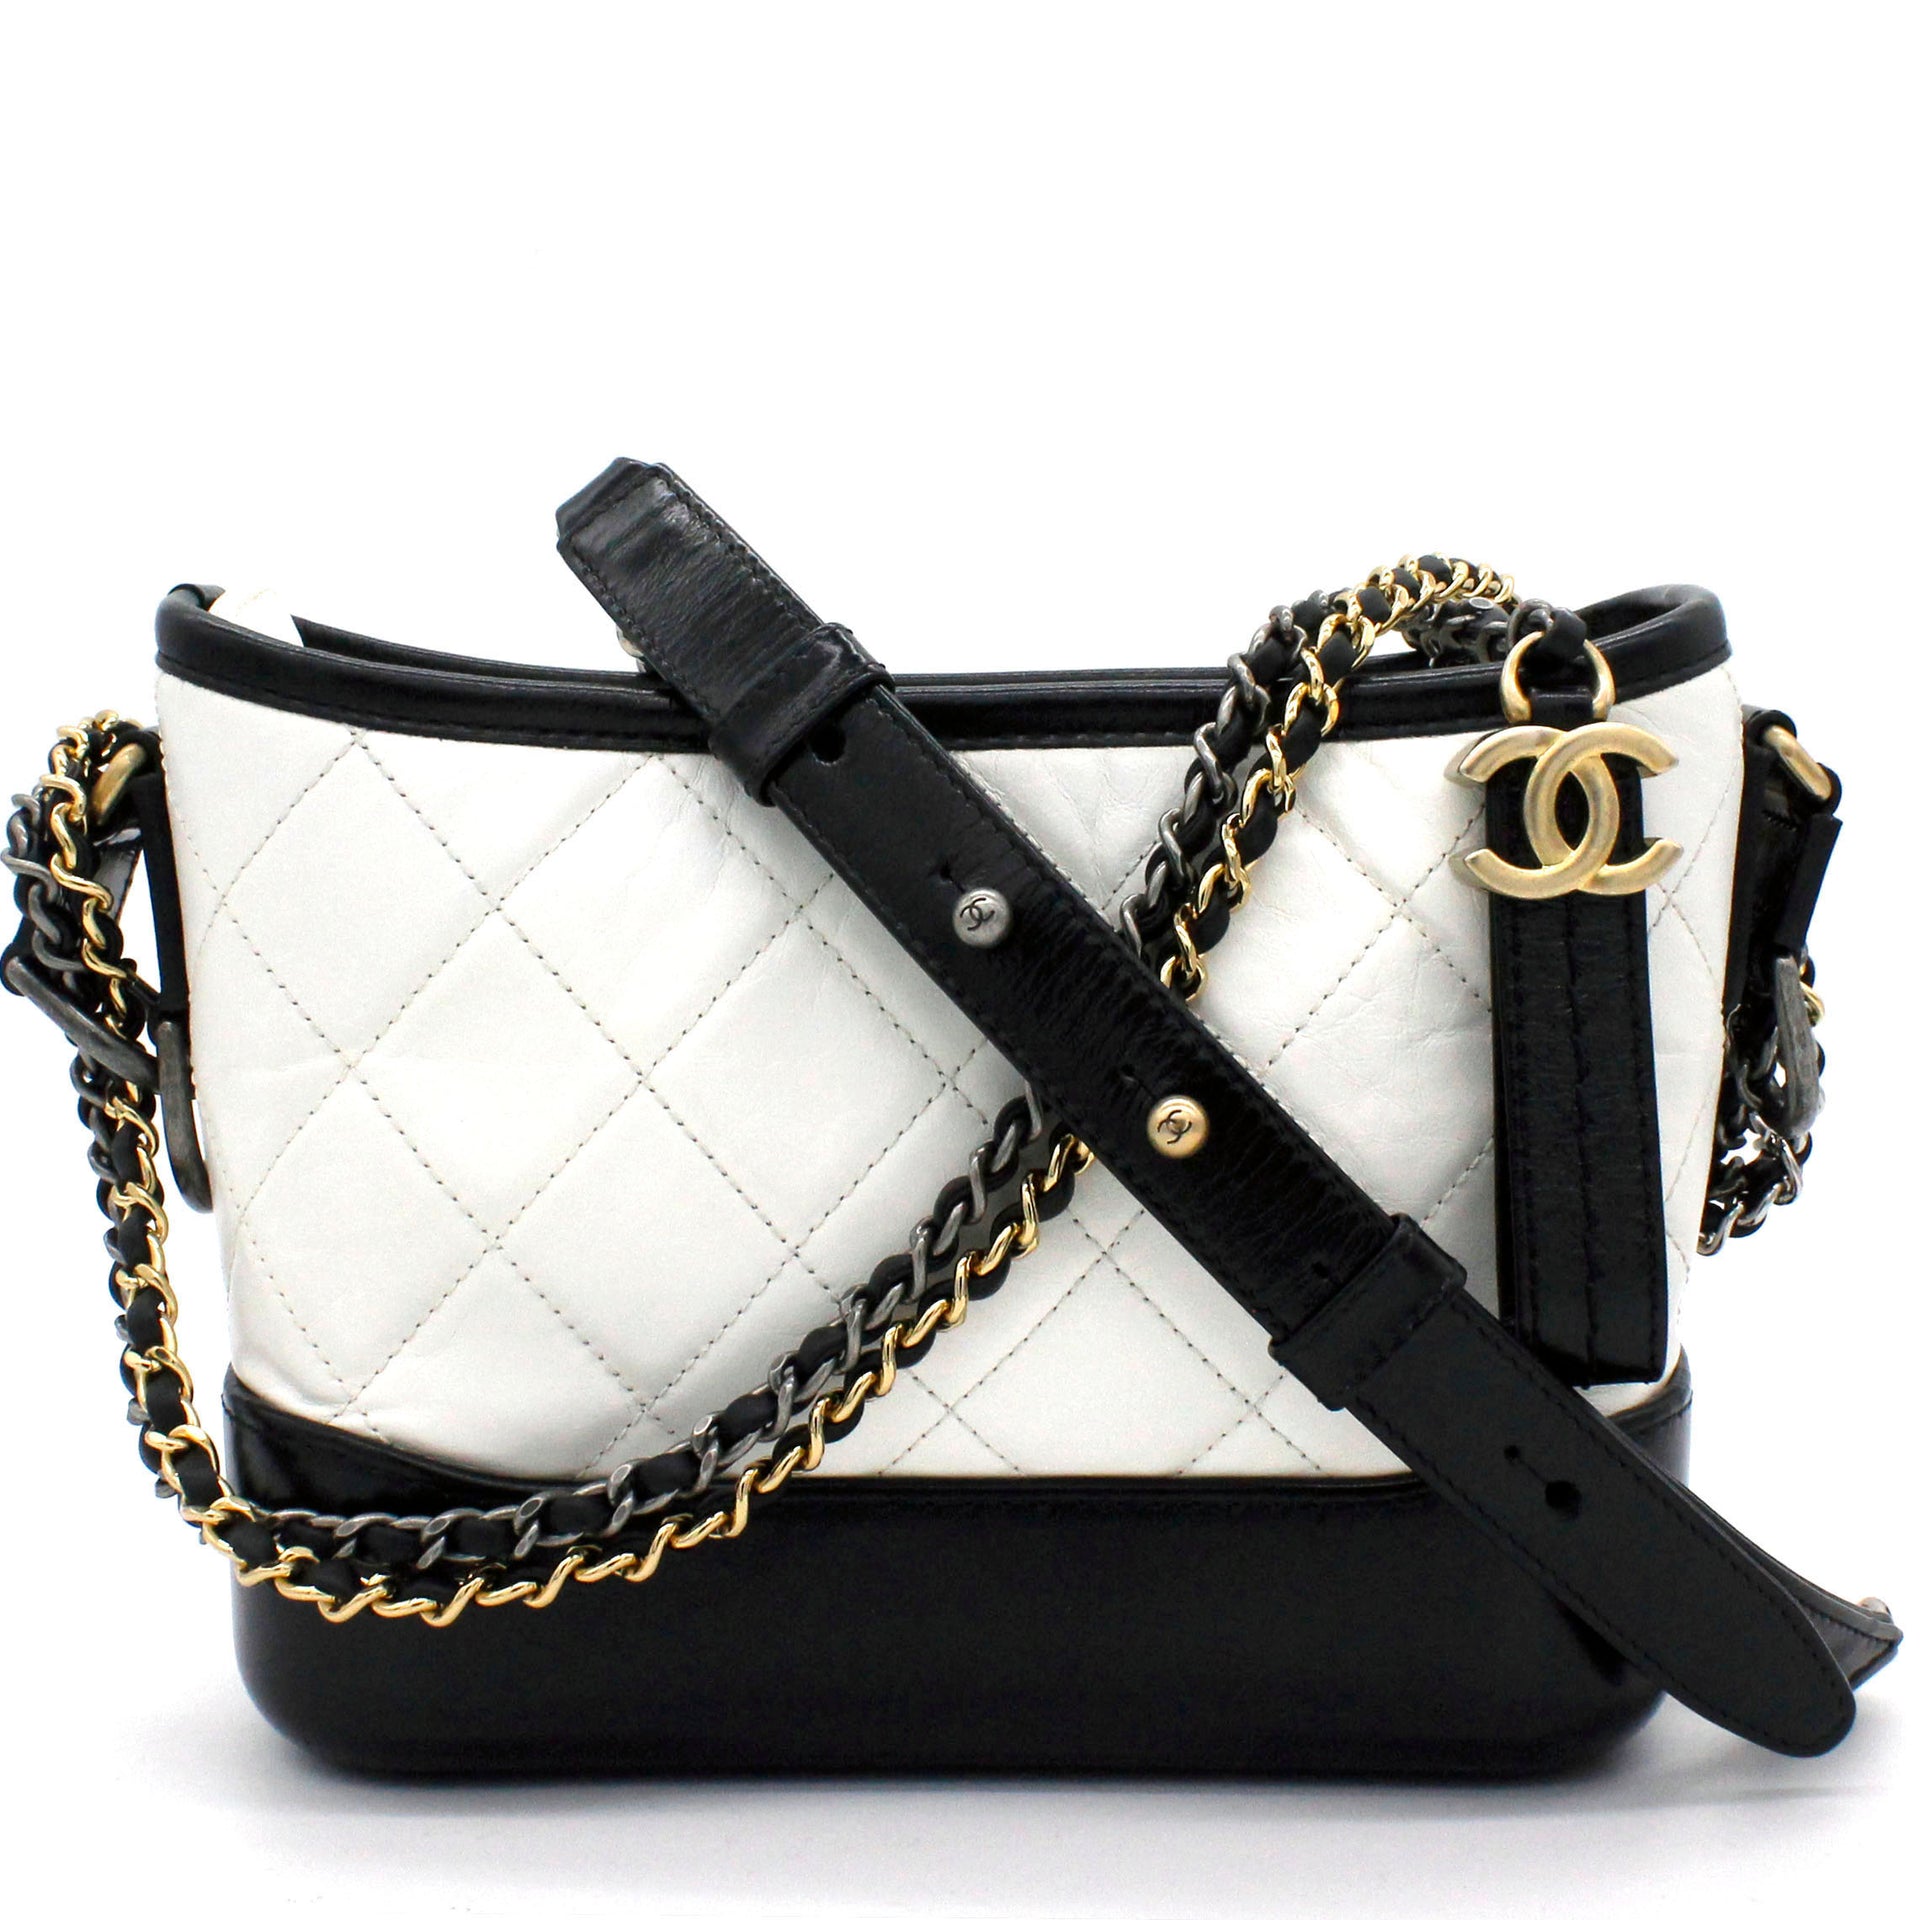 CHANEL Aged Calfskin Quilted Small Gabrielle Hobo Black White 1277783